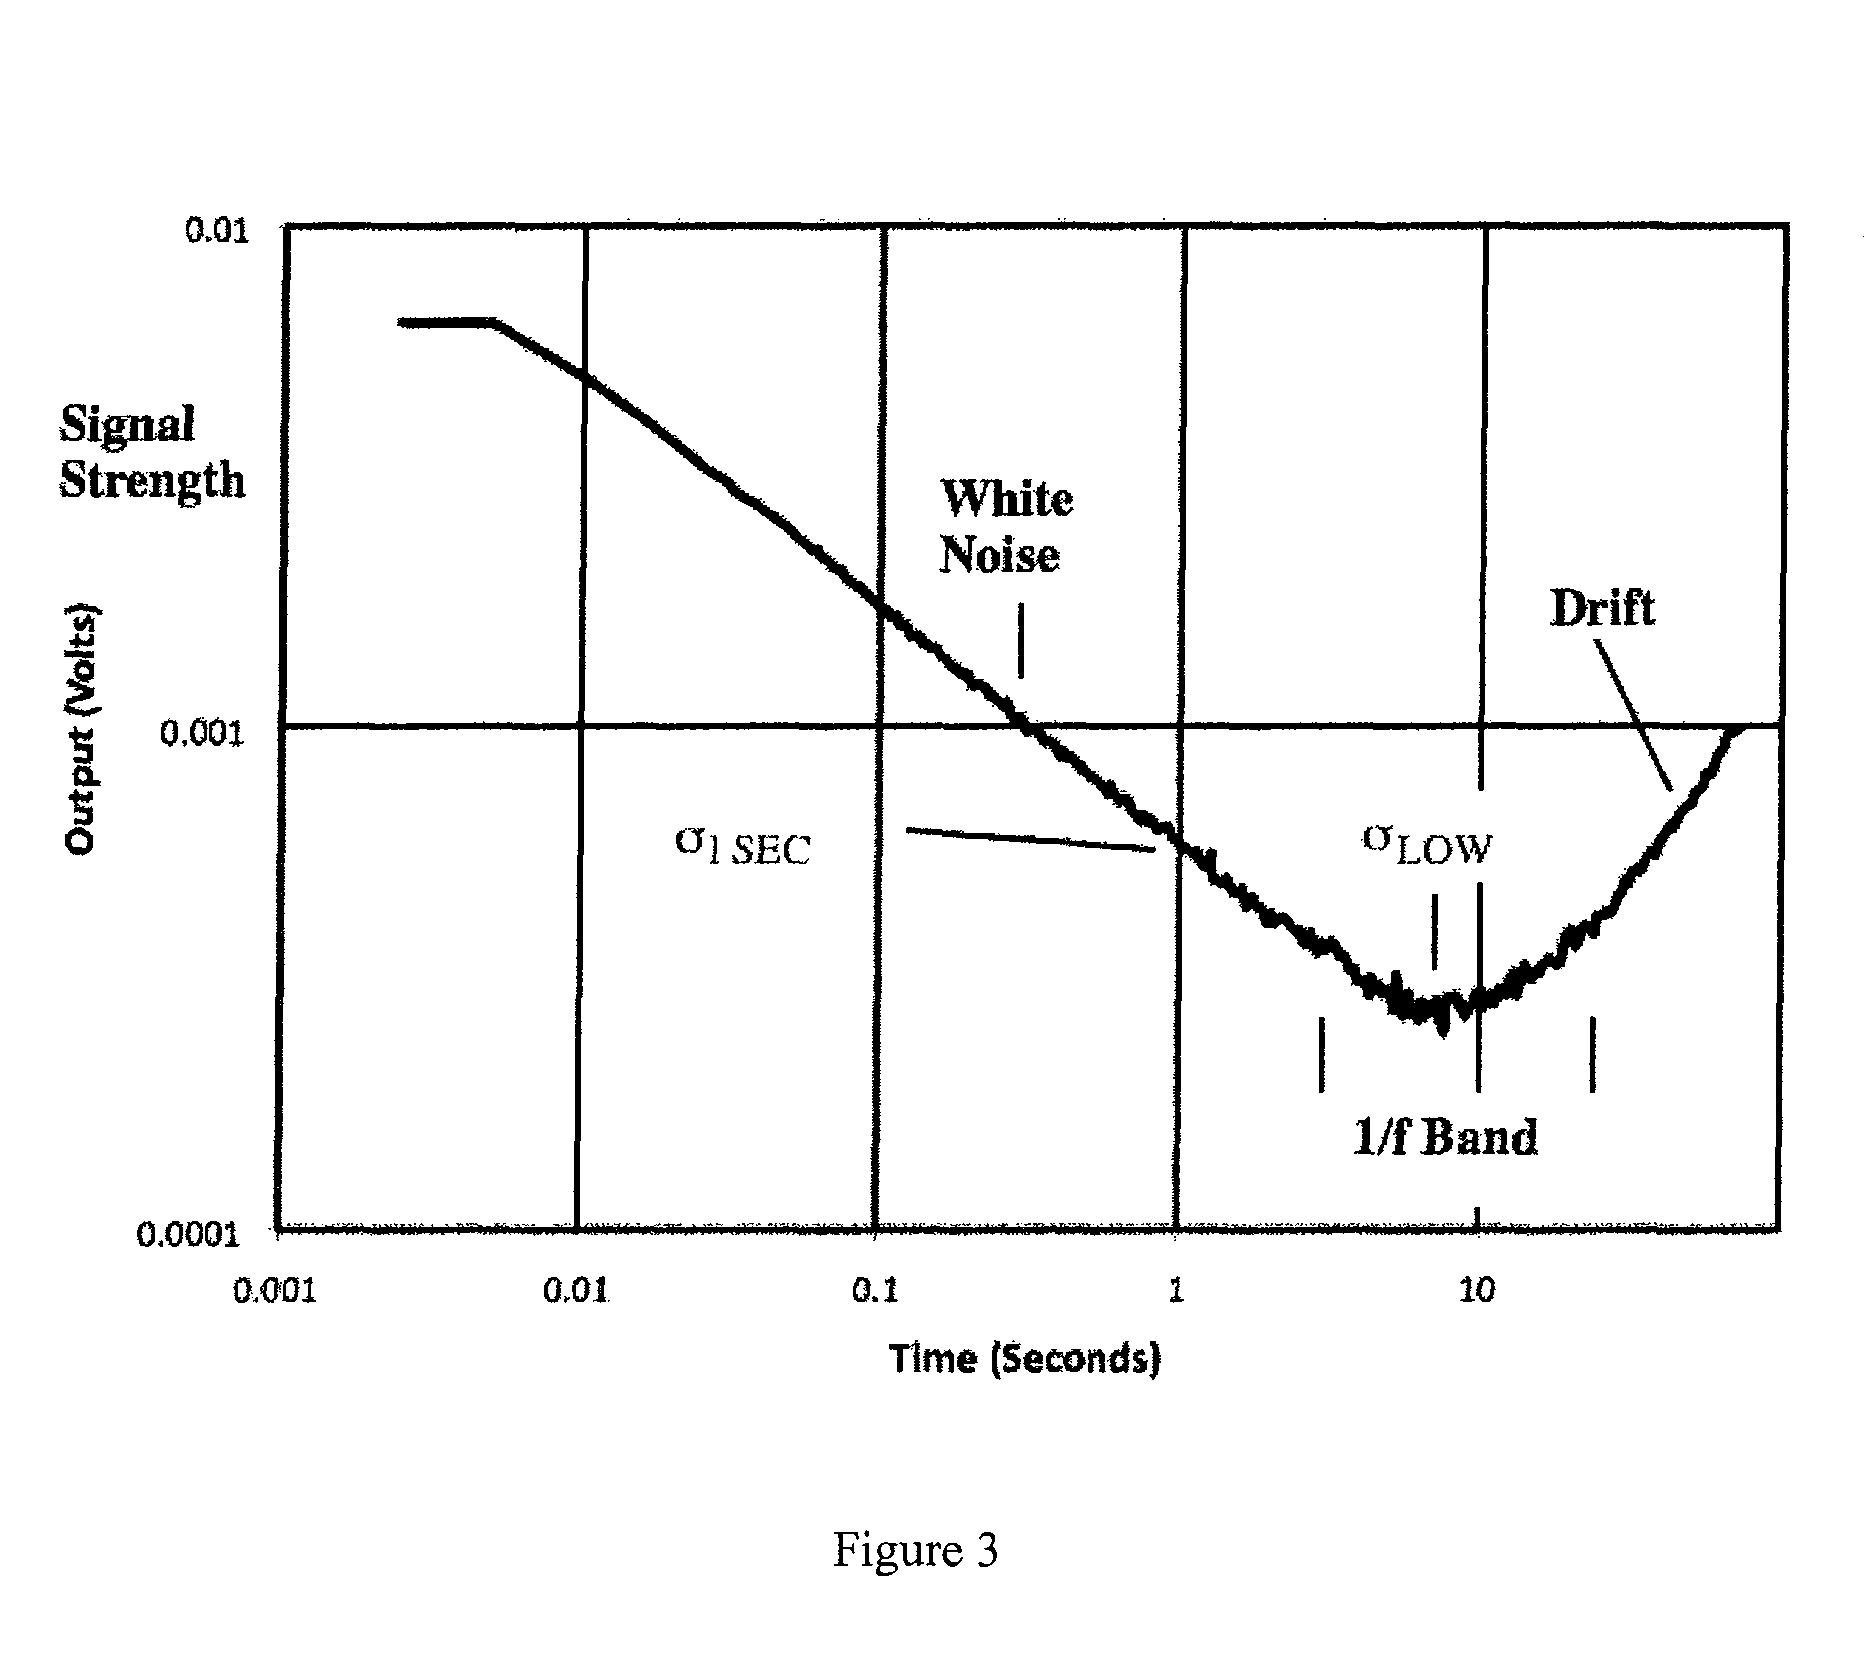 Inertial measurement unit for spin-stabilized aerial vehicles, and method of providing guidance information using same